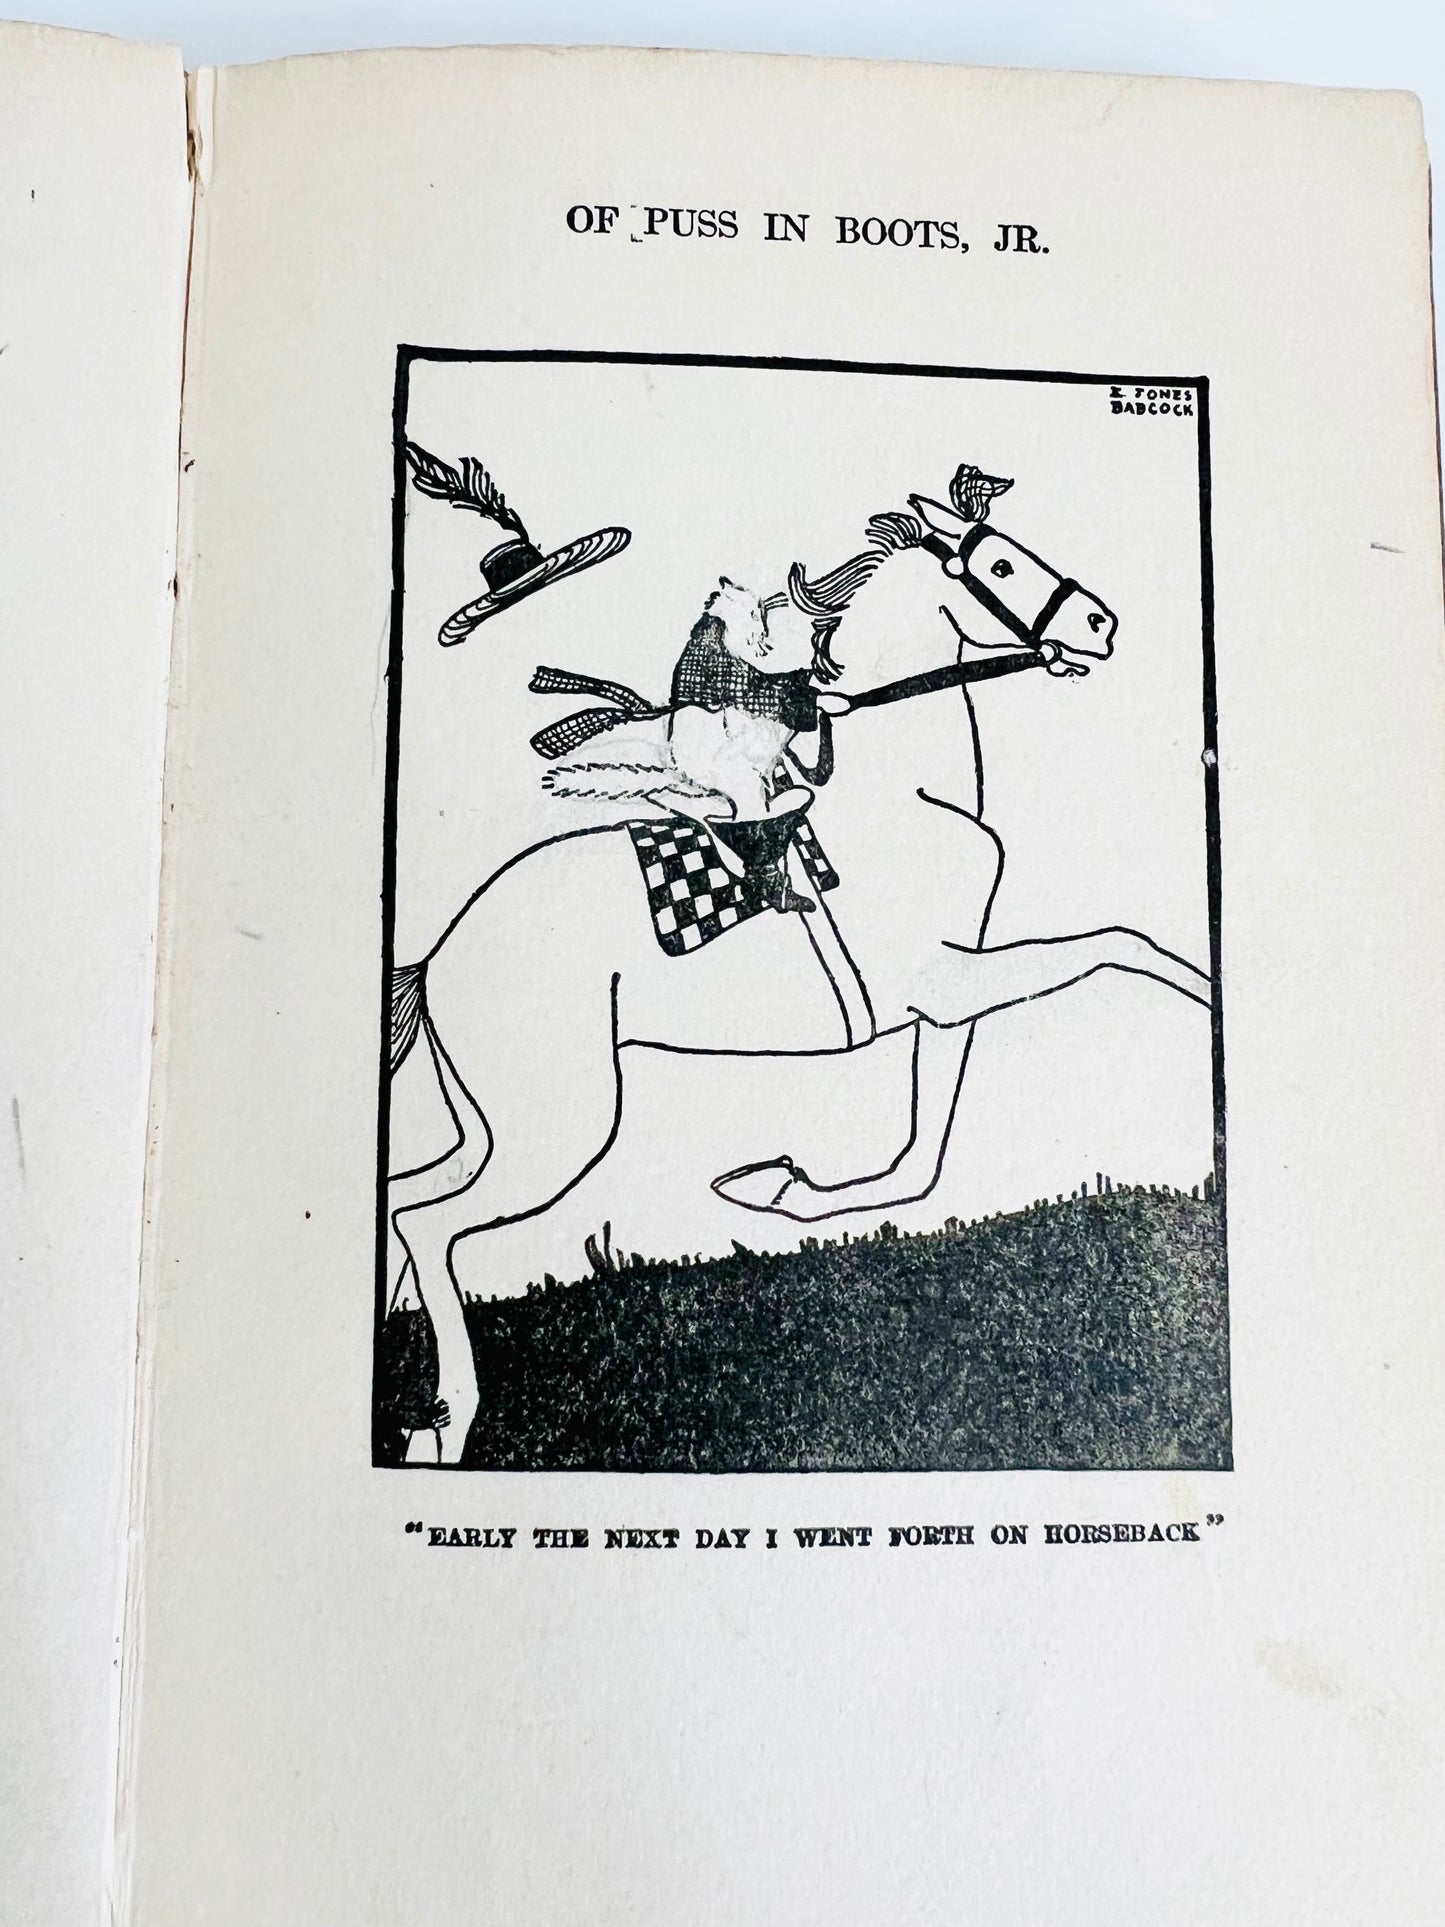 Puss In Boots Jr. Harper Brothers 1917 Edition